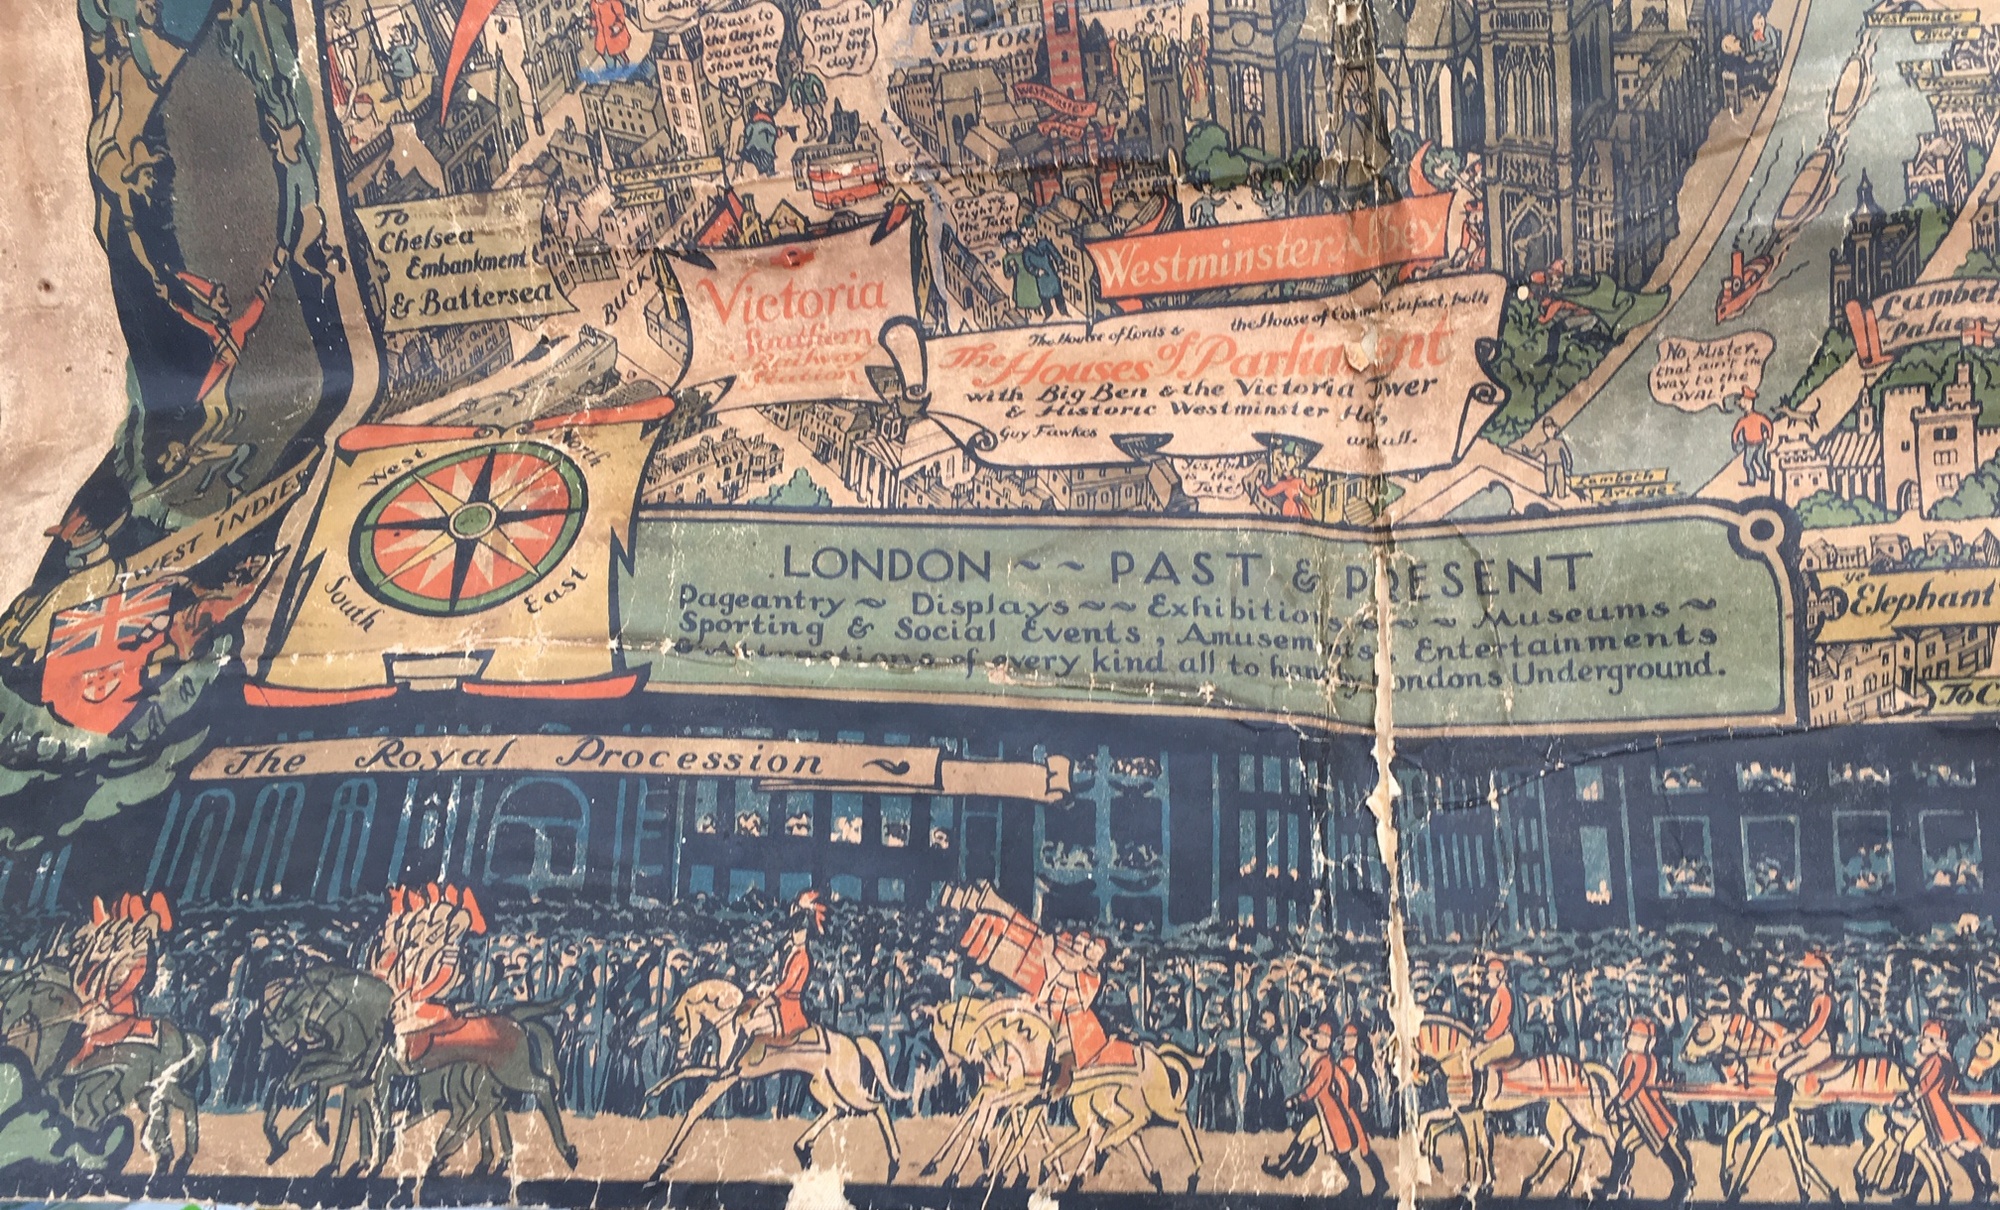 Vintage 1930s Southern Railway Map on Cloth of London - 47 1/2" x 35". - Image 2 of 6